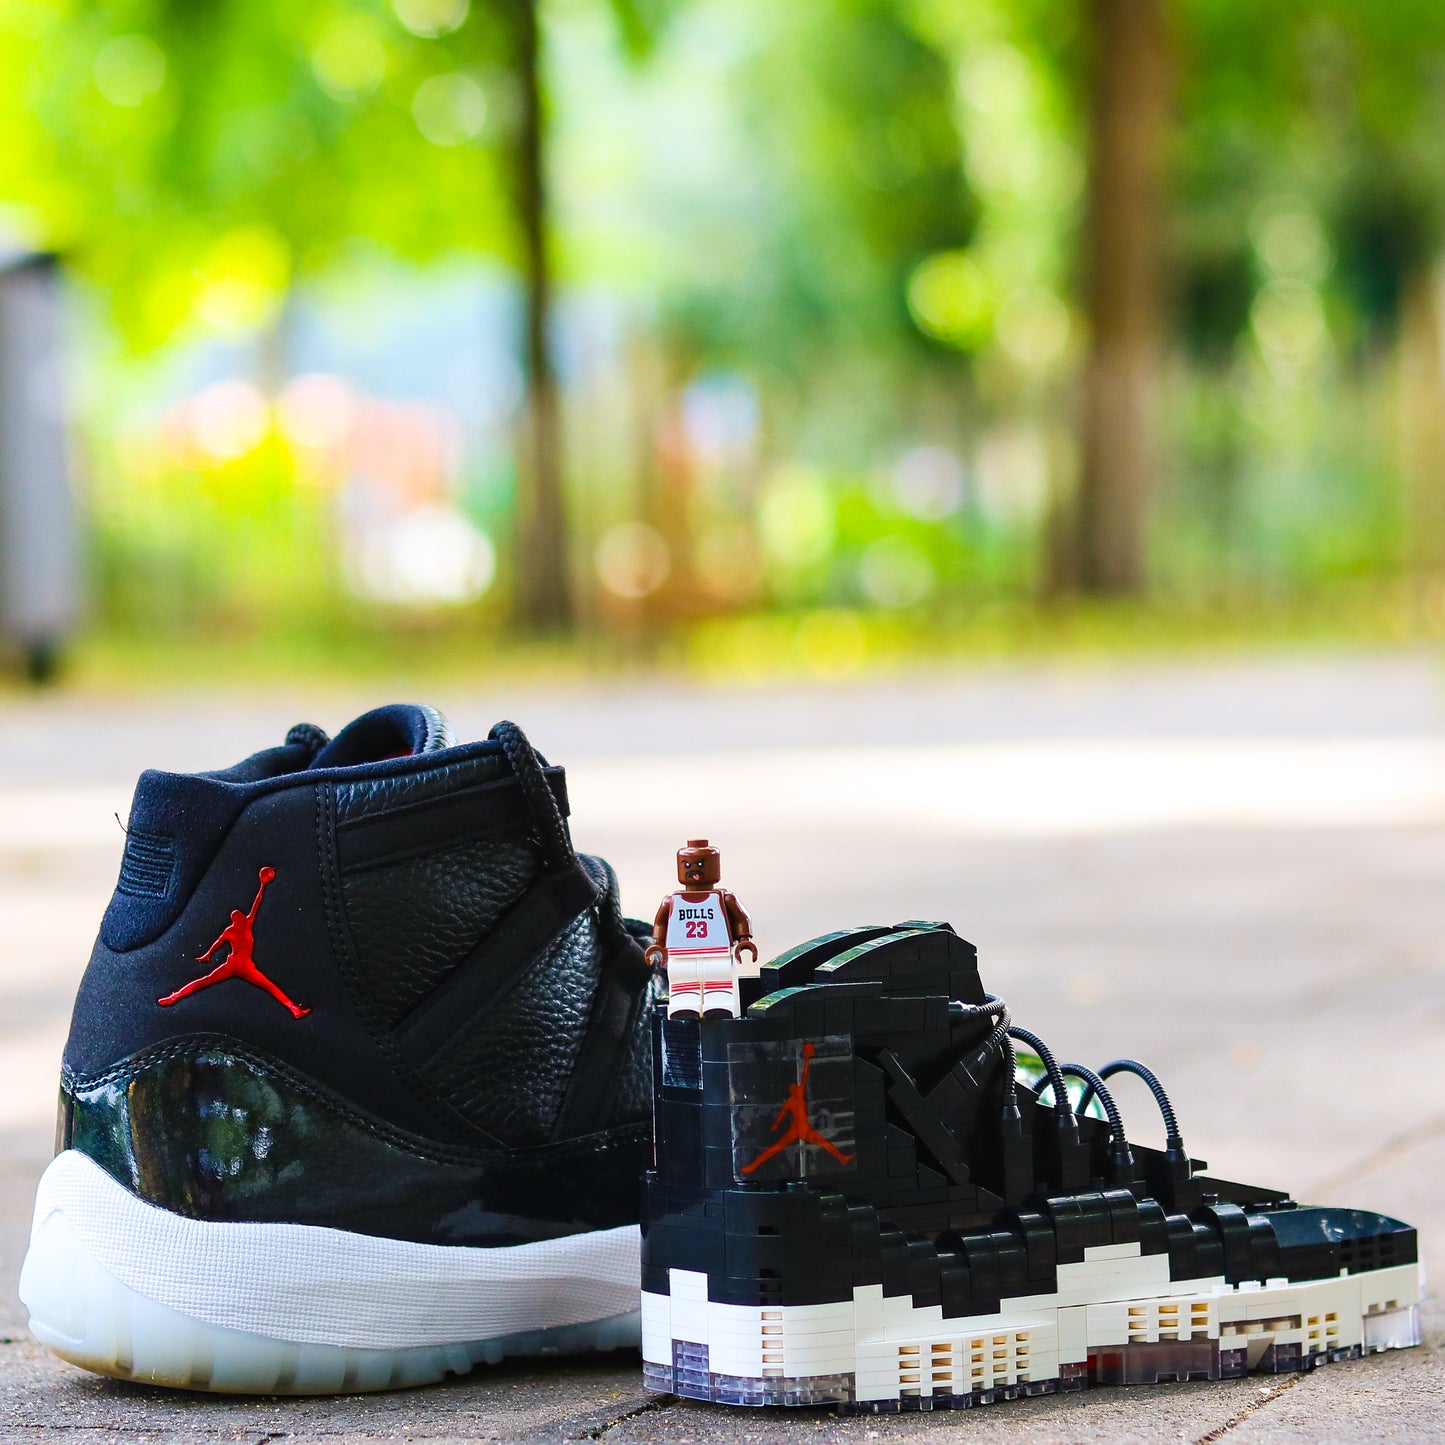 LARGE AJ11 "BRED"/"72-10" 2 in 1 Sneaker Bricks Sneaker 3D Puzzle Building Toy with Mini Figure